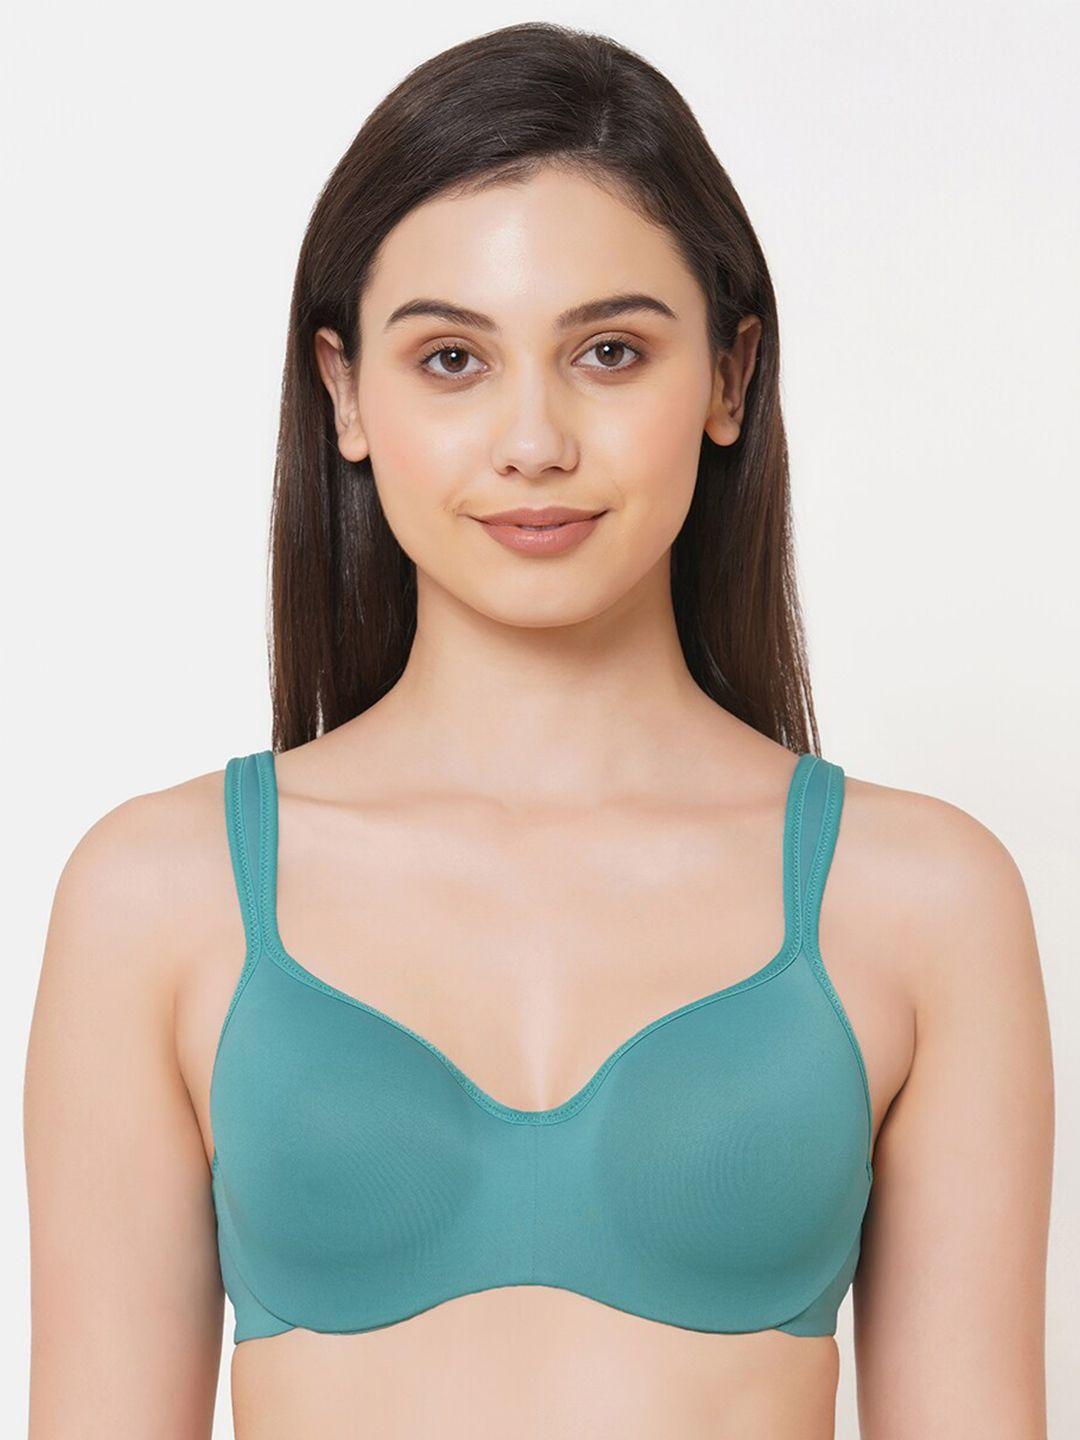 soie teal blue underwired lightly padded bra cb-130teal